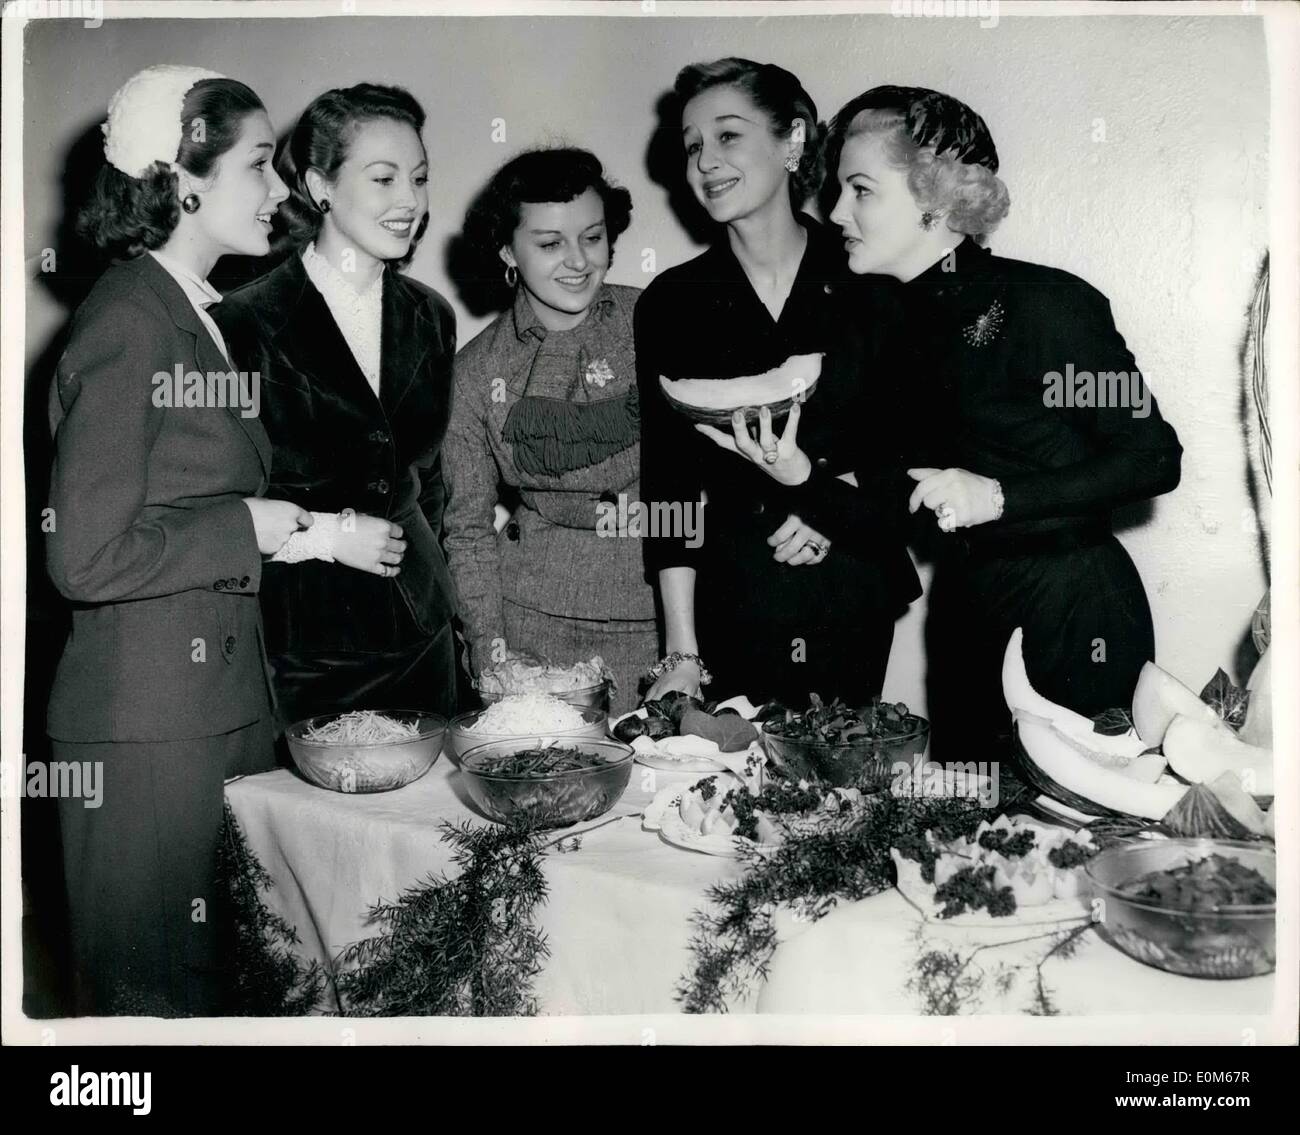 Sep. 09, 1953 - Vivian Blaine gives luncheon to British leading ladies.: Vivian Blaine, leading lady in ''Guys and Dolls'' gave Stock Photo